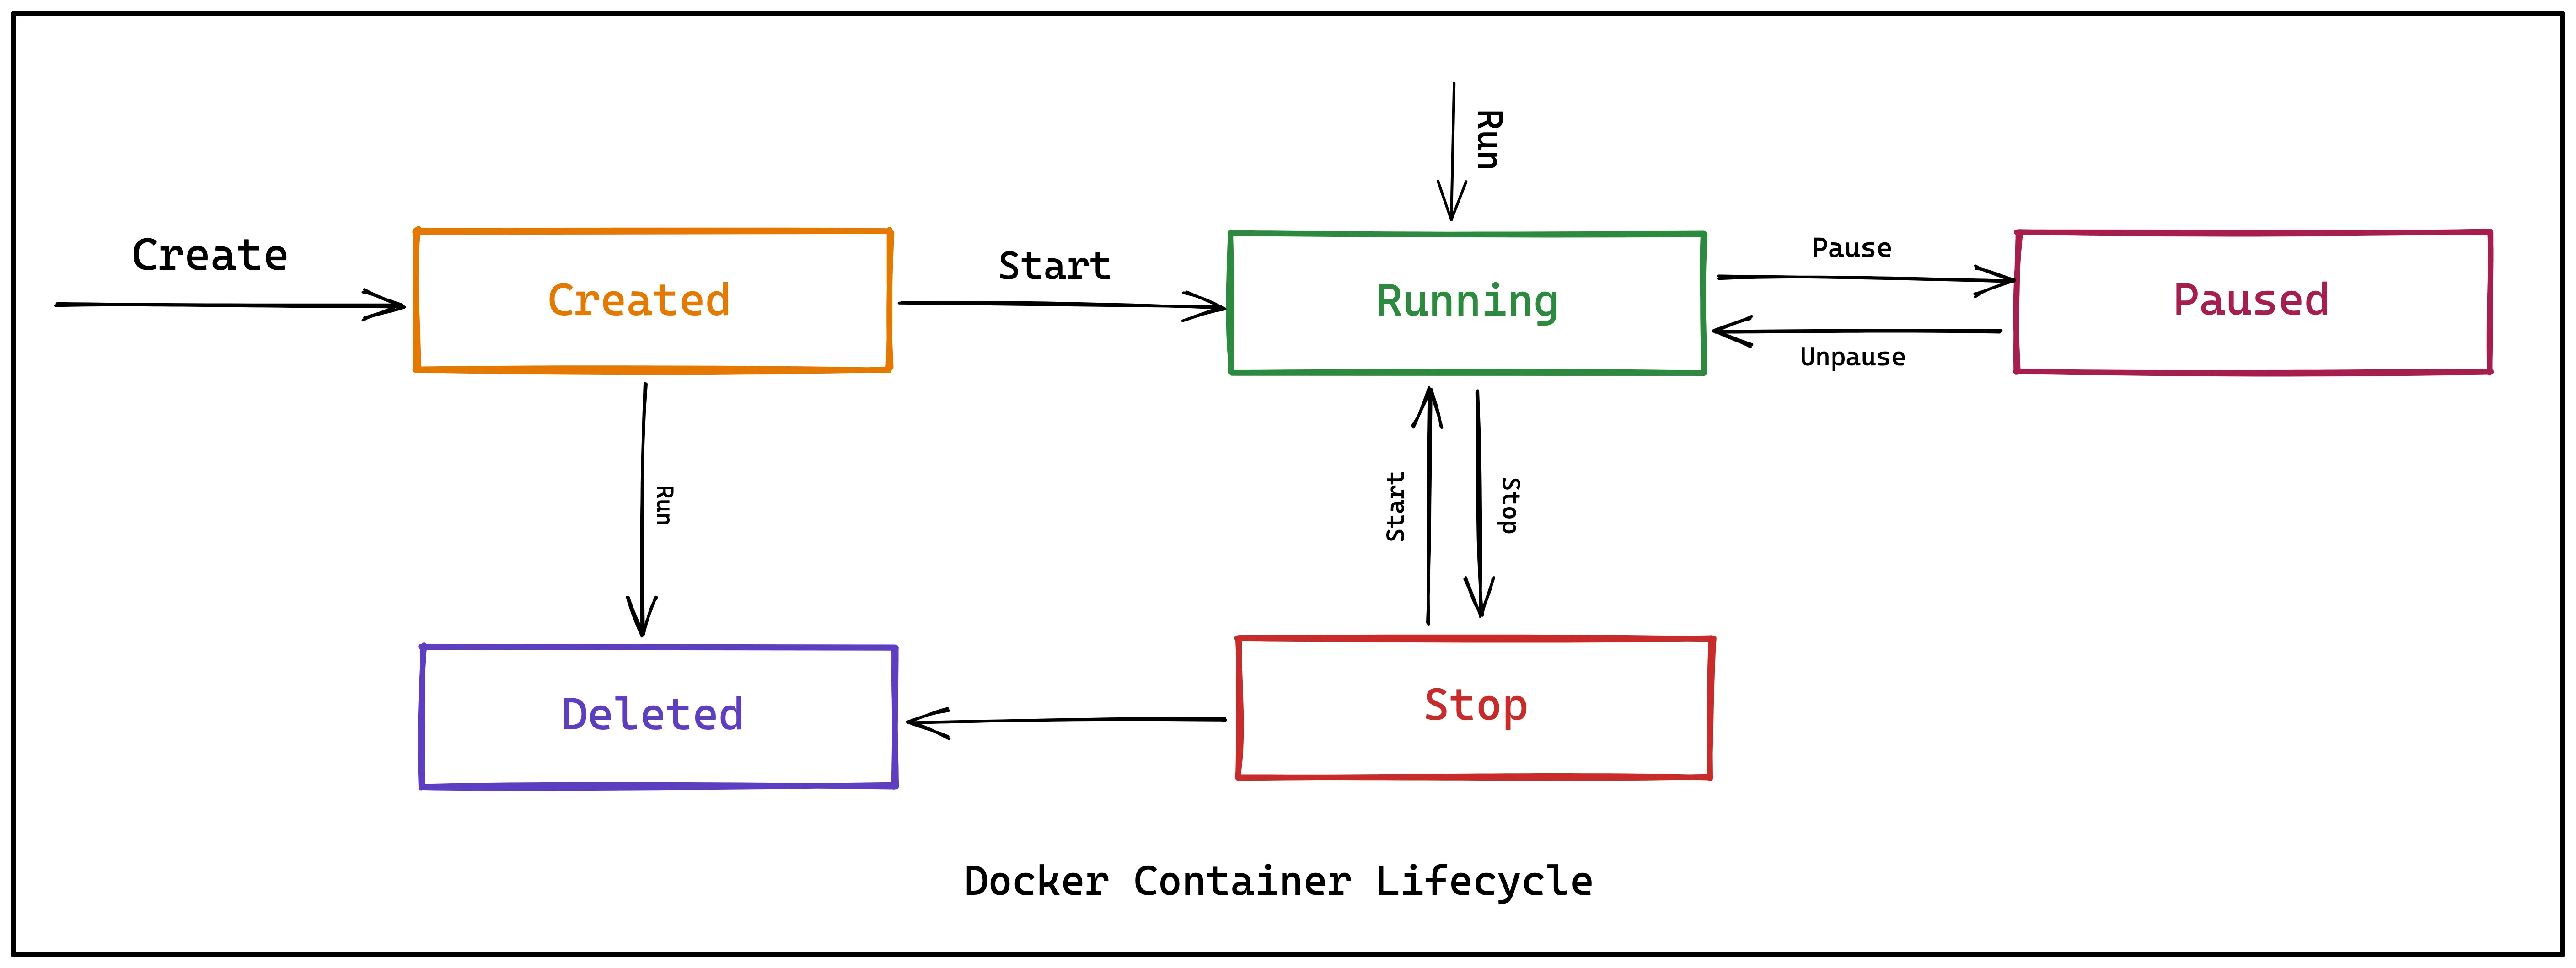 Docker Container Lifecycle